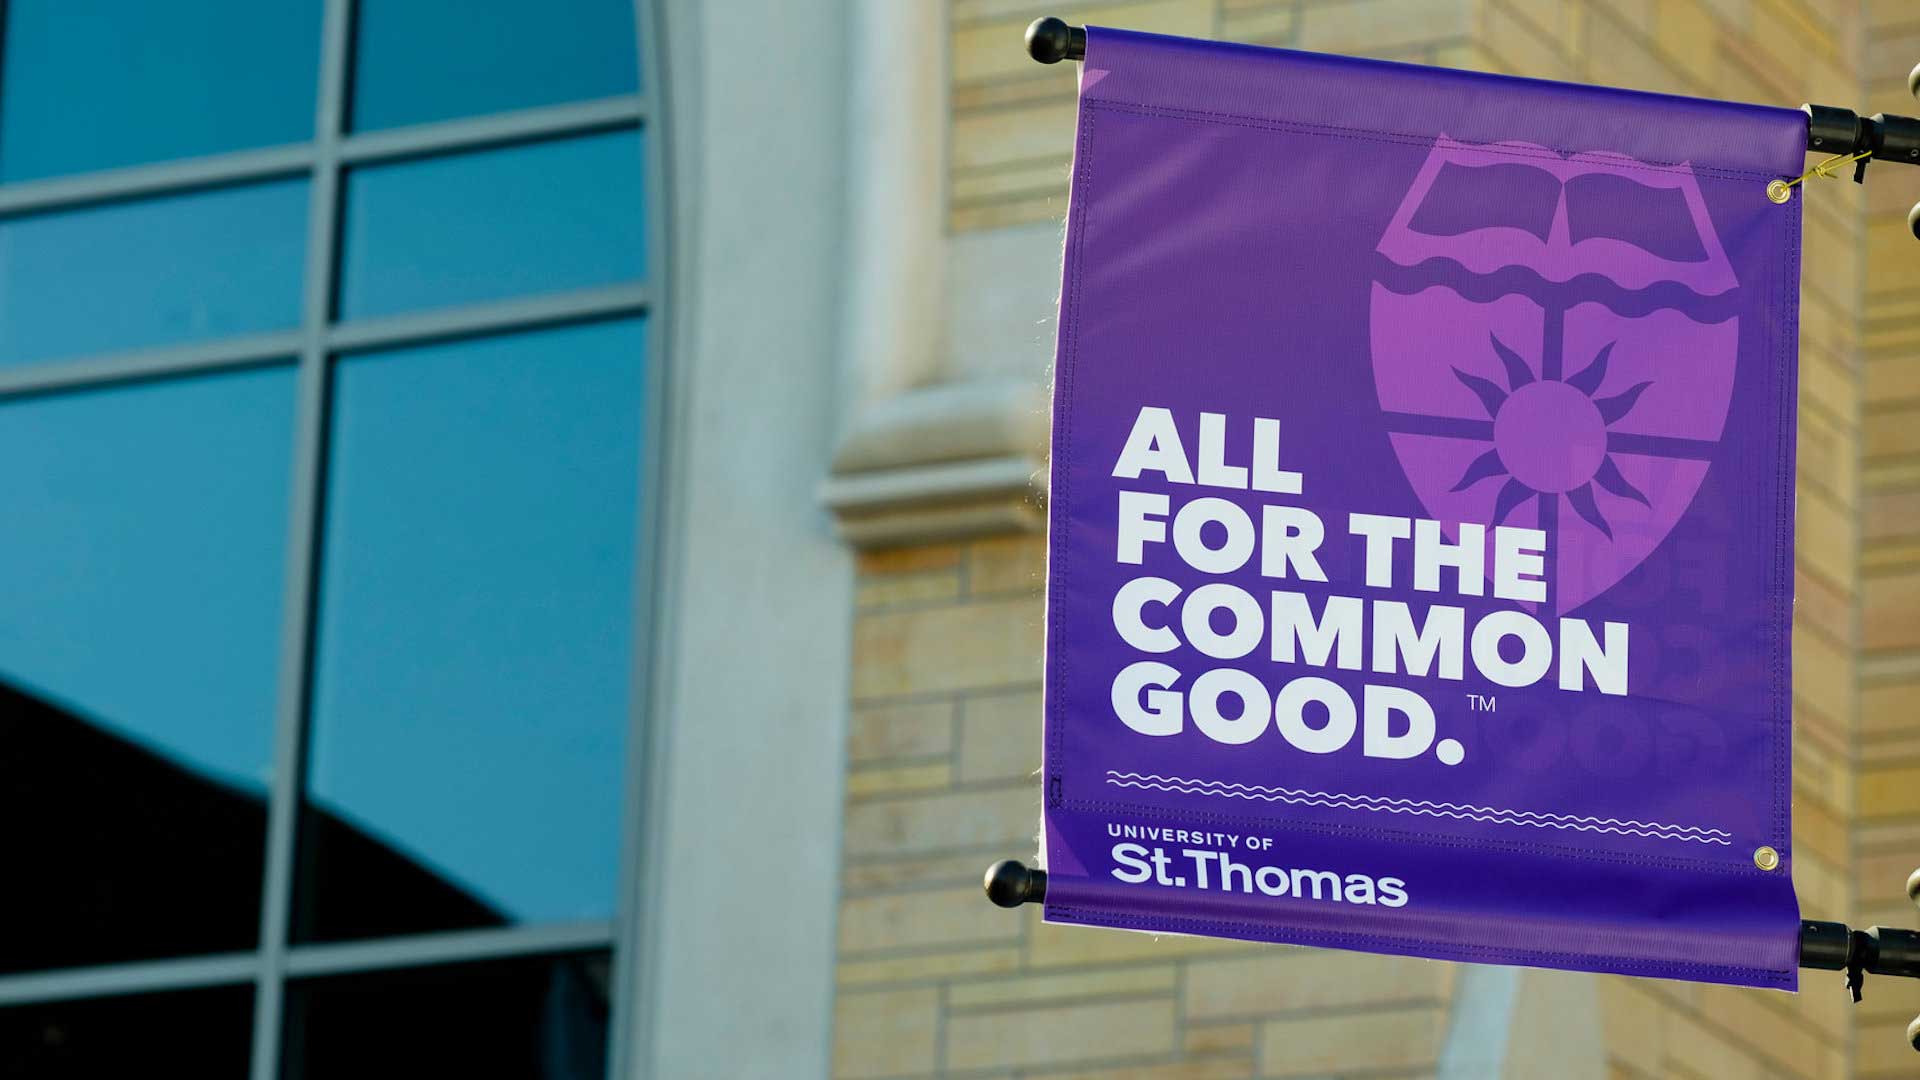 University of St. Thomas "All for the Common Good" banner